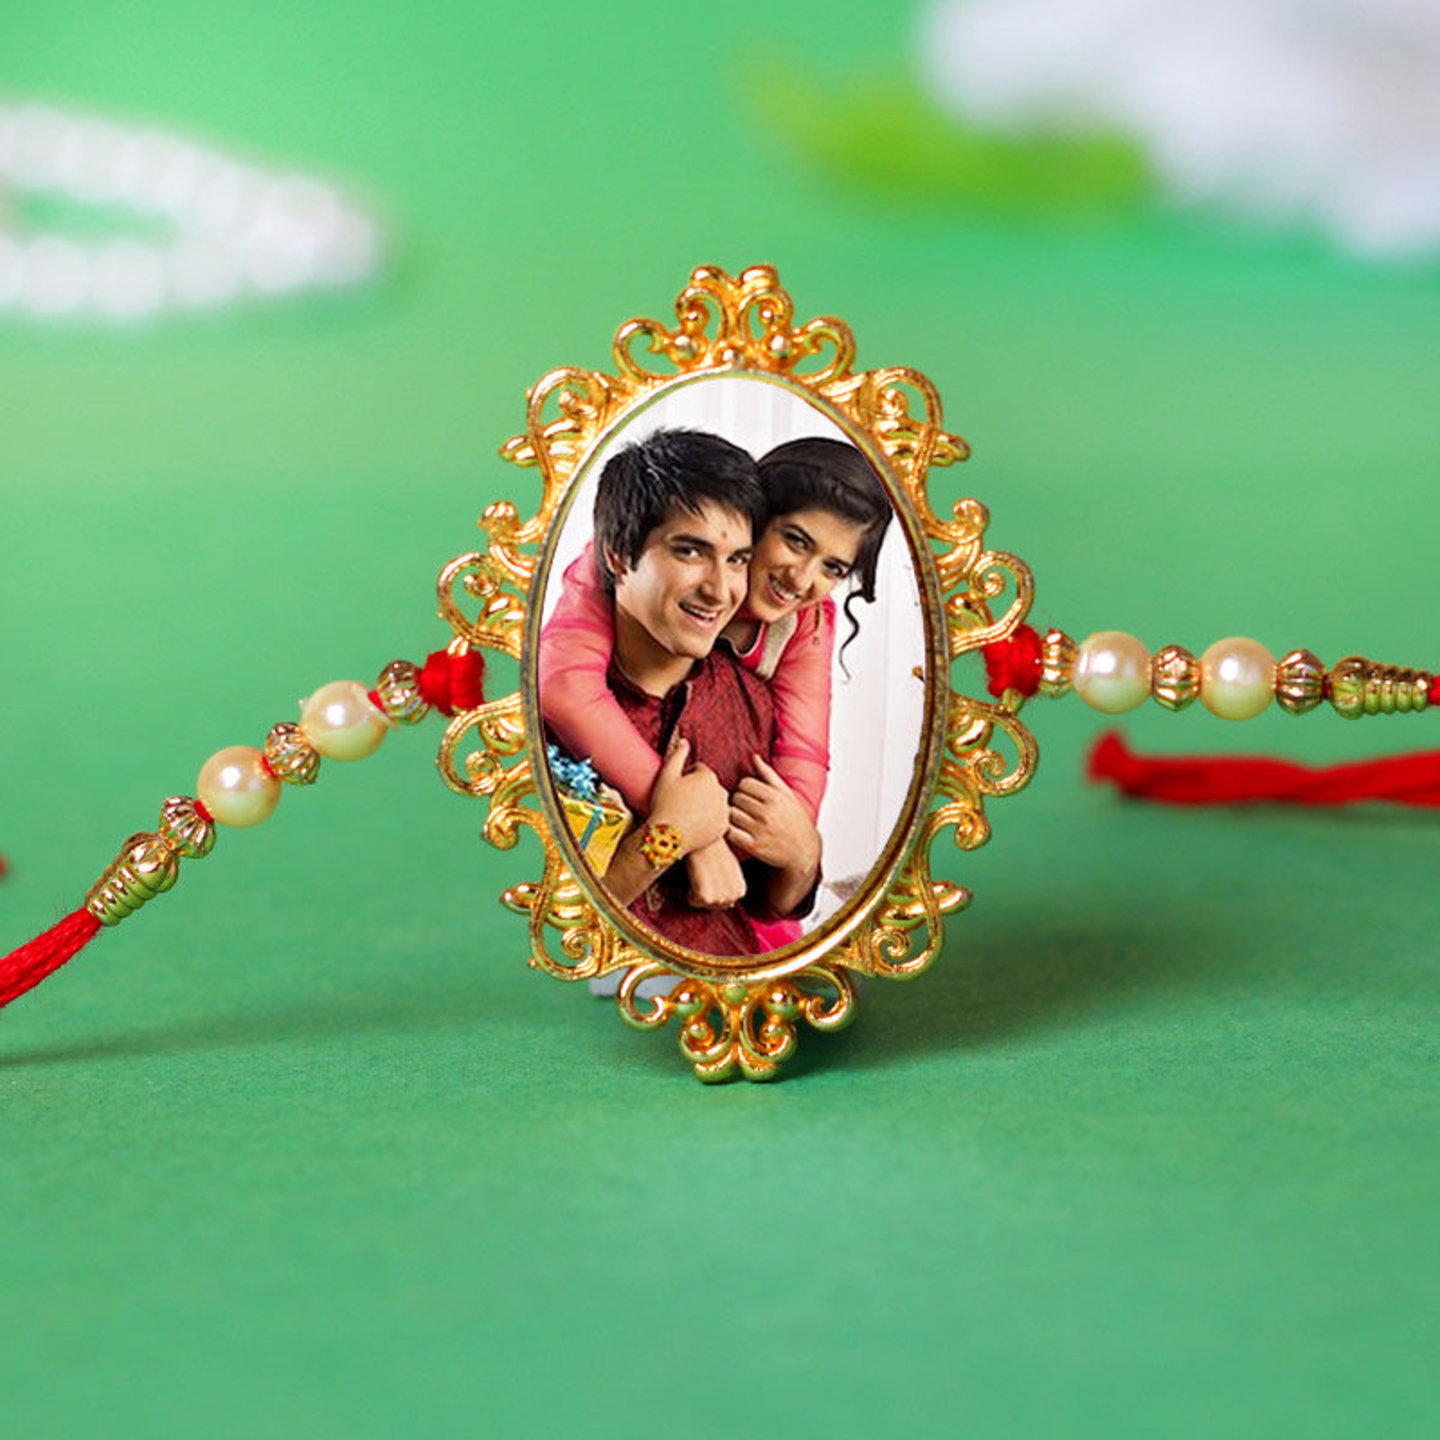 Personalized Metal Rakhi with your photo printed on it